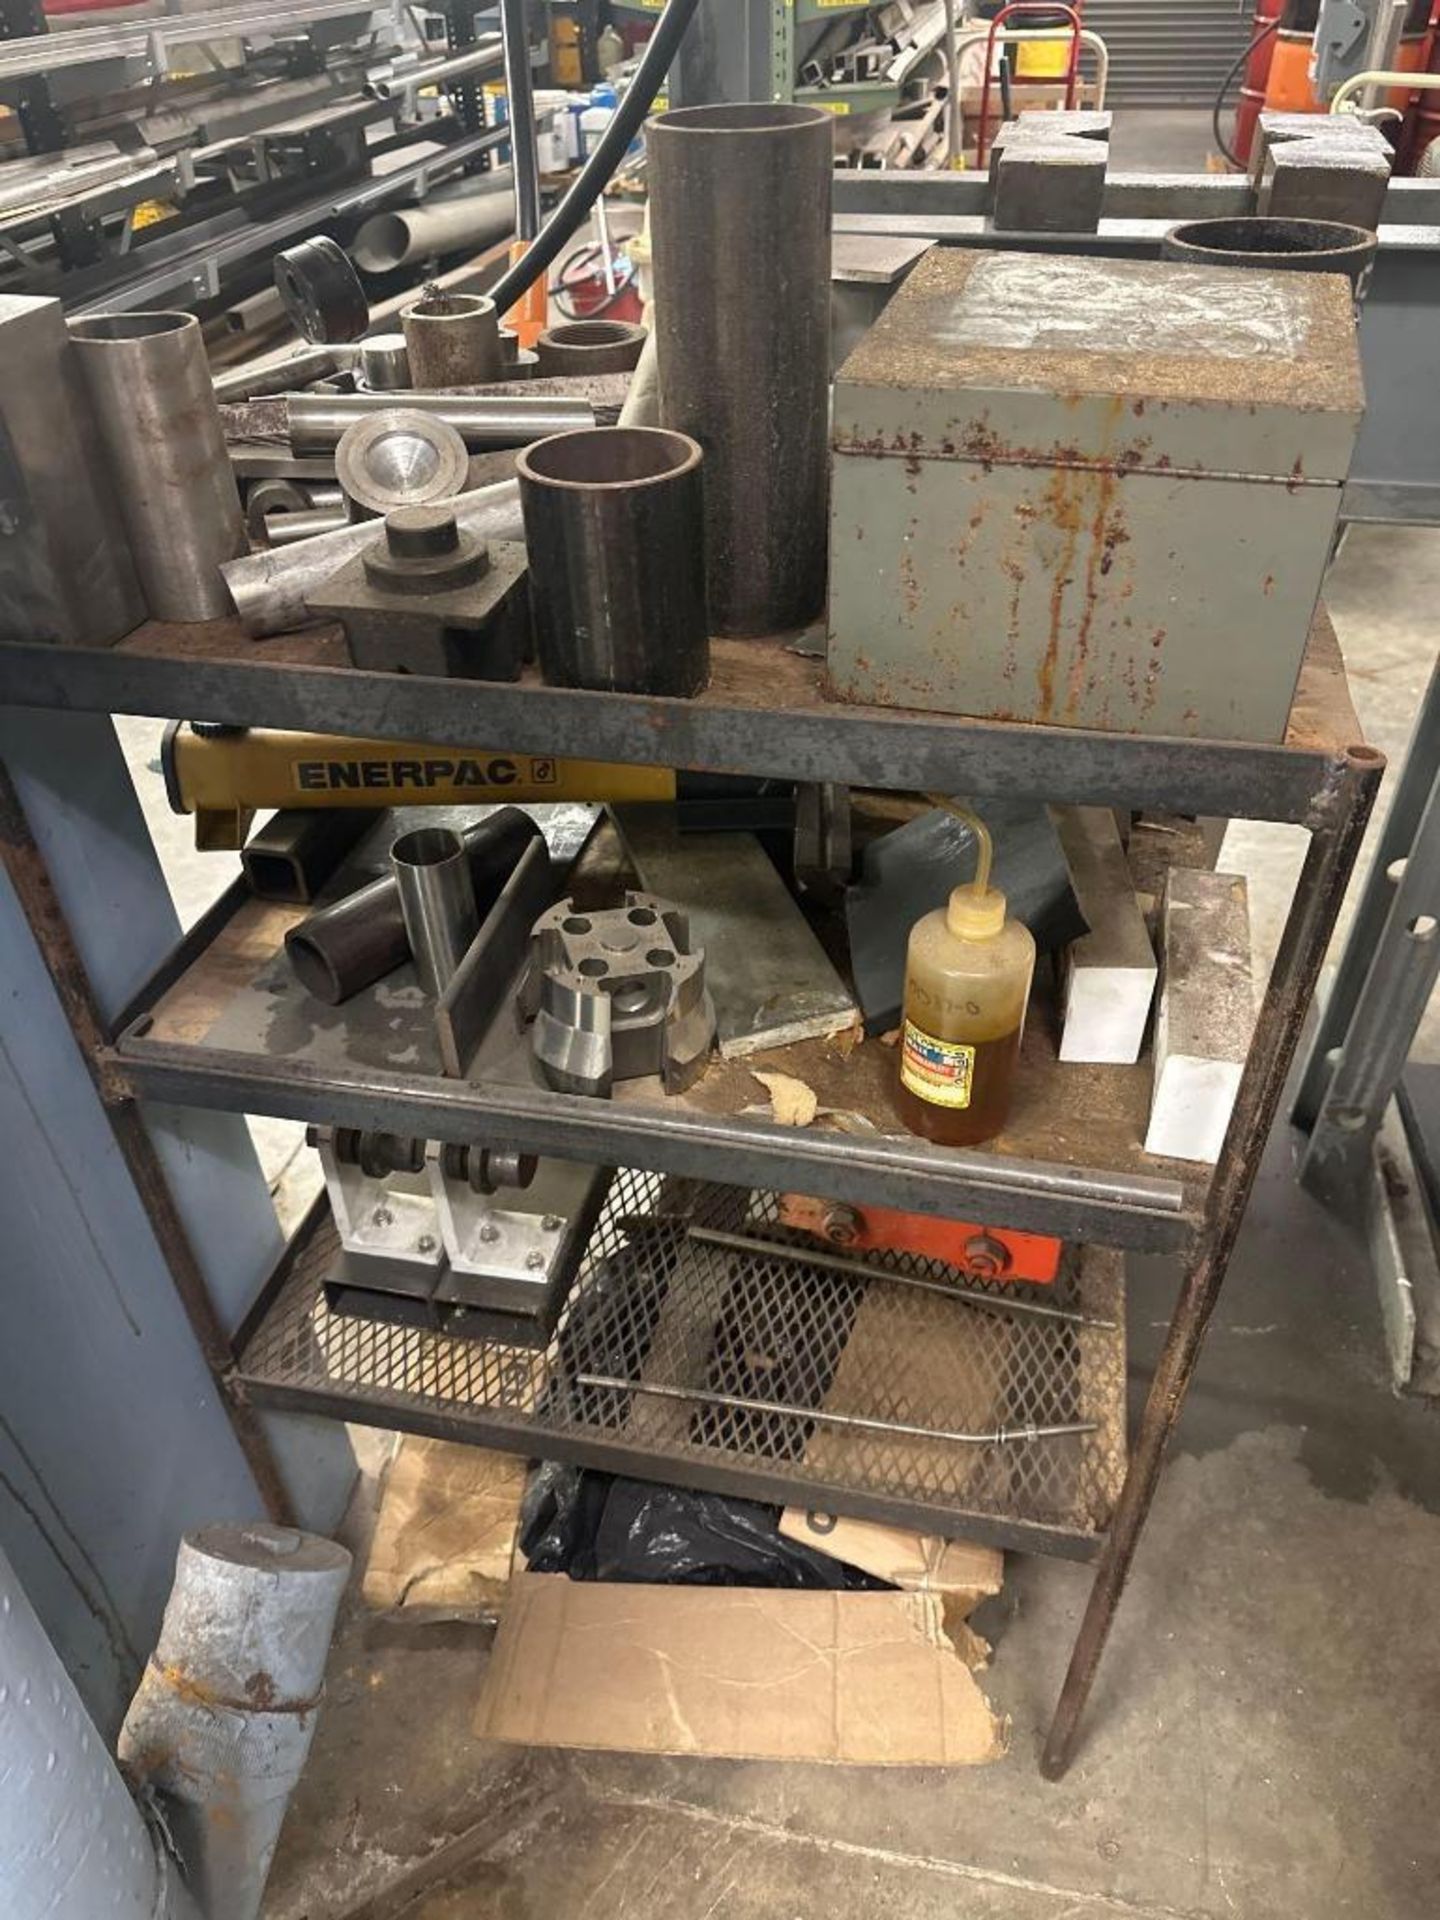 Hydraulic Shop Press Including Cart of Accessories - Image 2 of 2